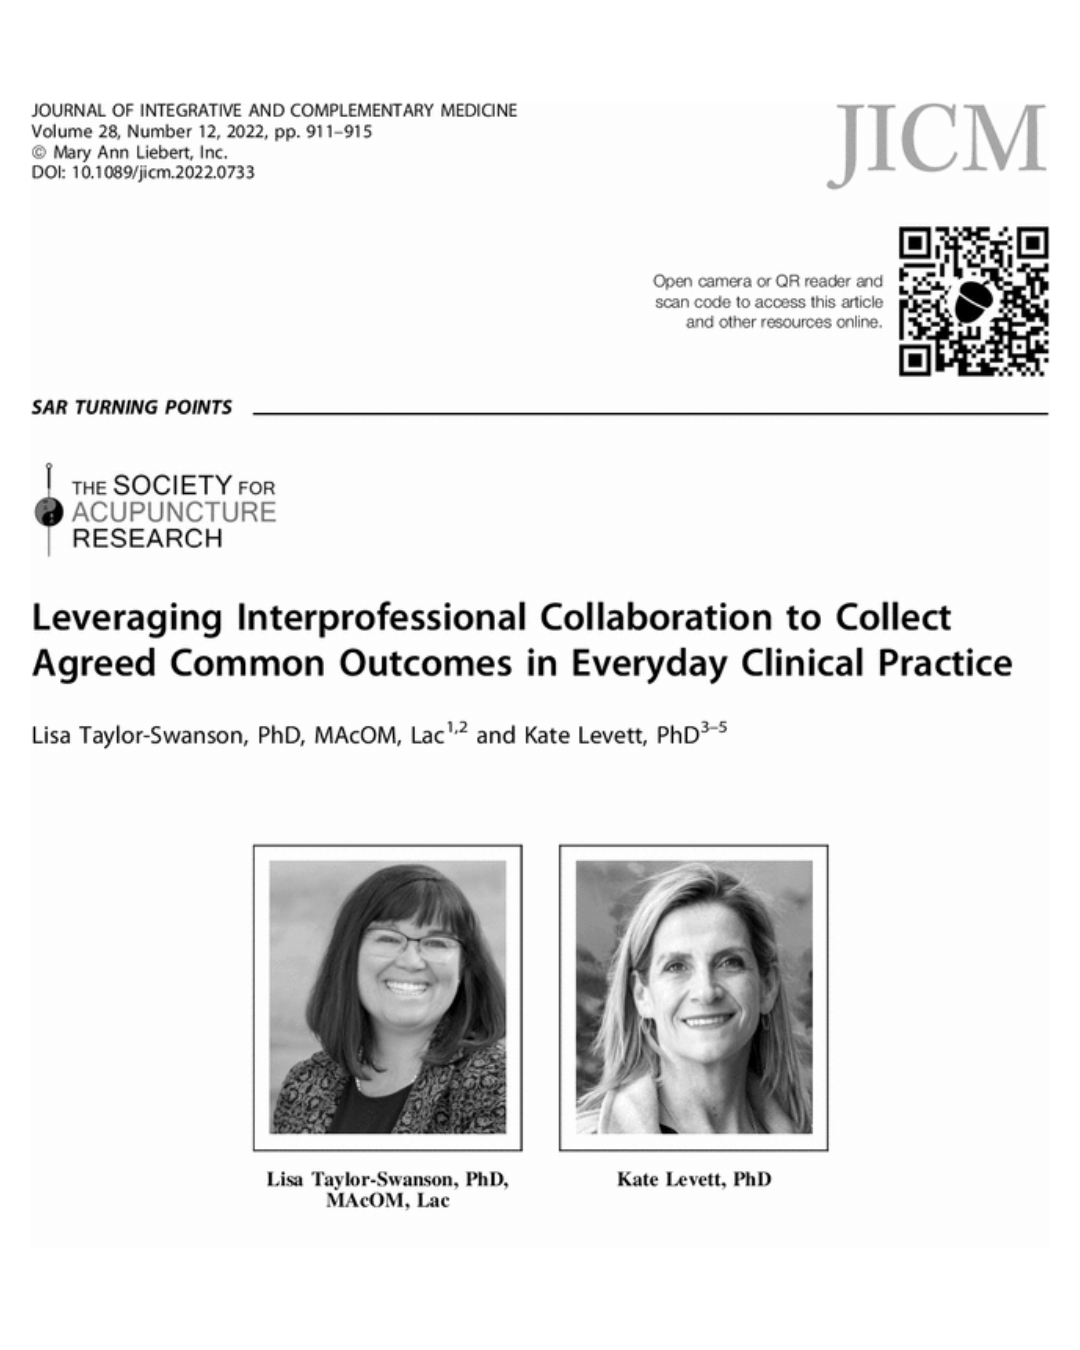 Leveraging Interprofessional Collaboration to Collect Agreed Common Outcomes in Everyday Clinical Practice